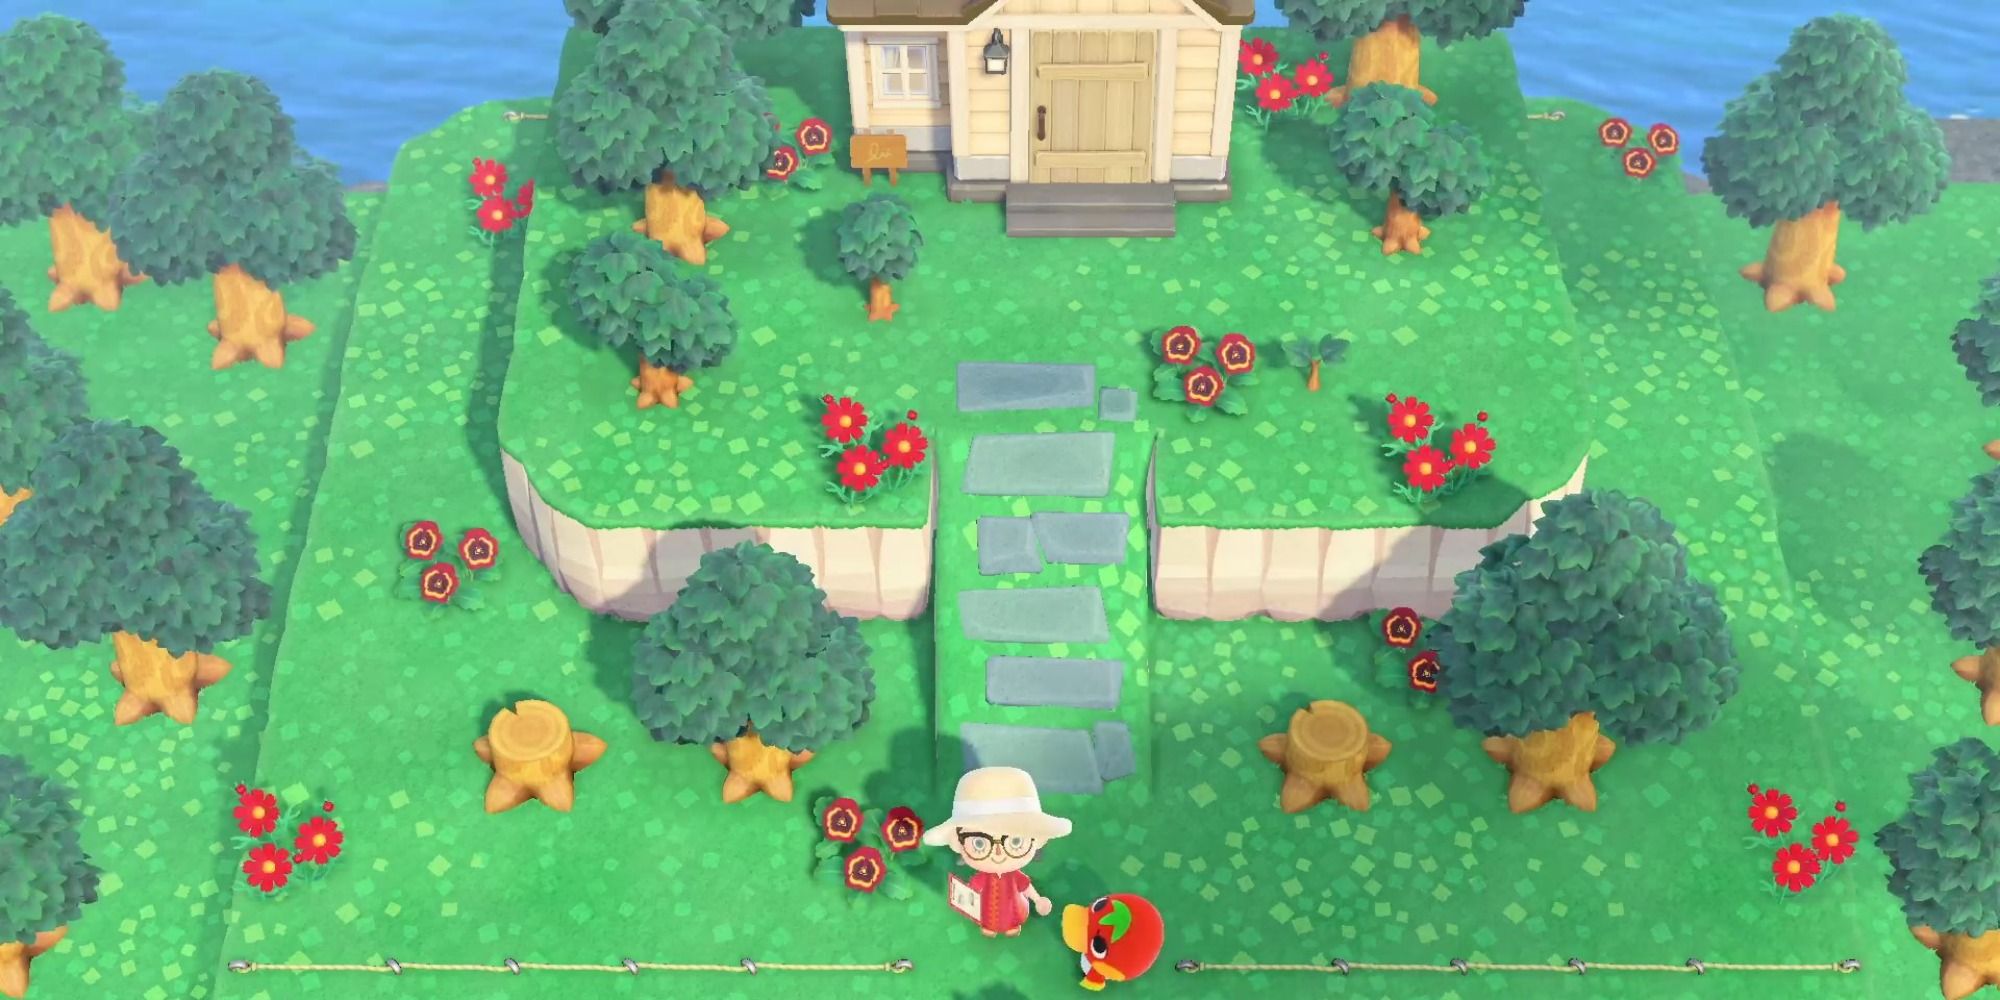 A player stands at the base of a natural ramp by a red duck, surrounded by trees and flowers